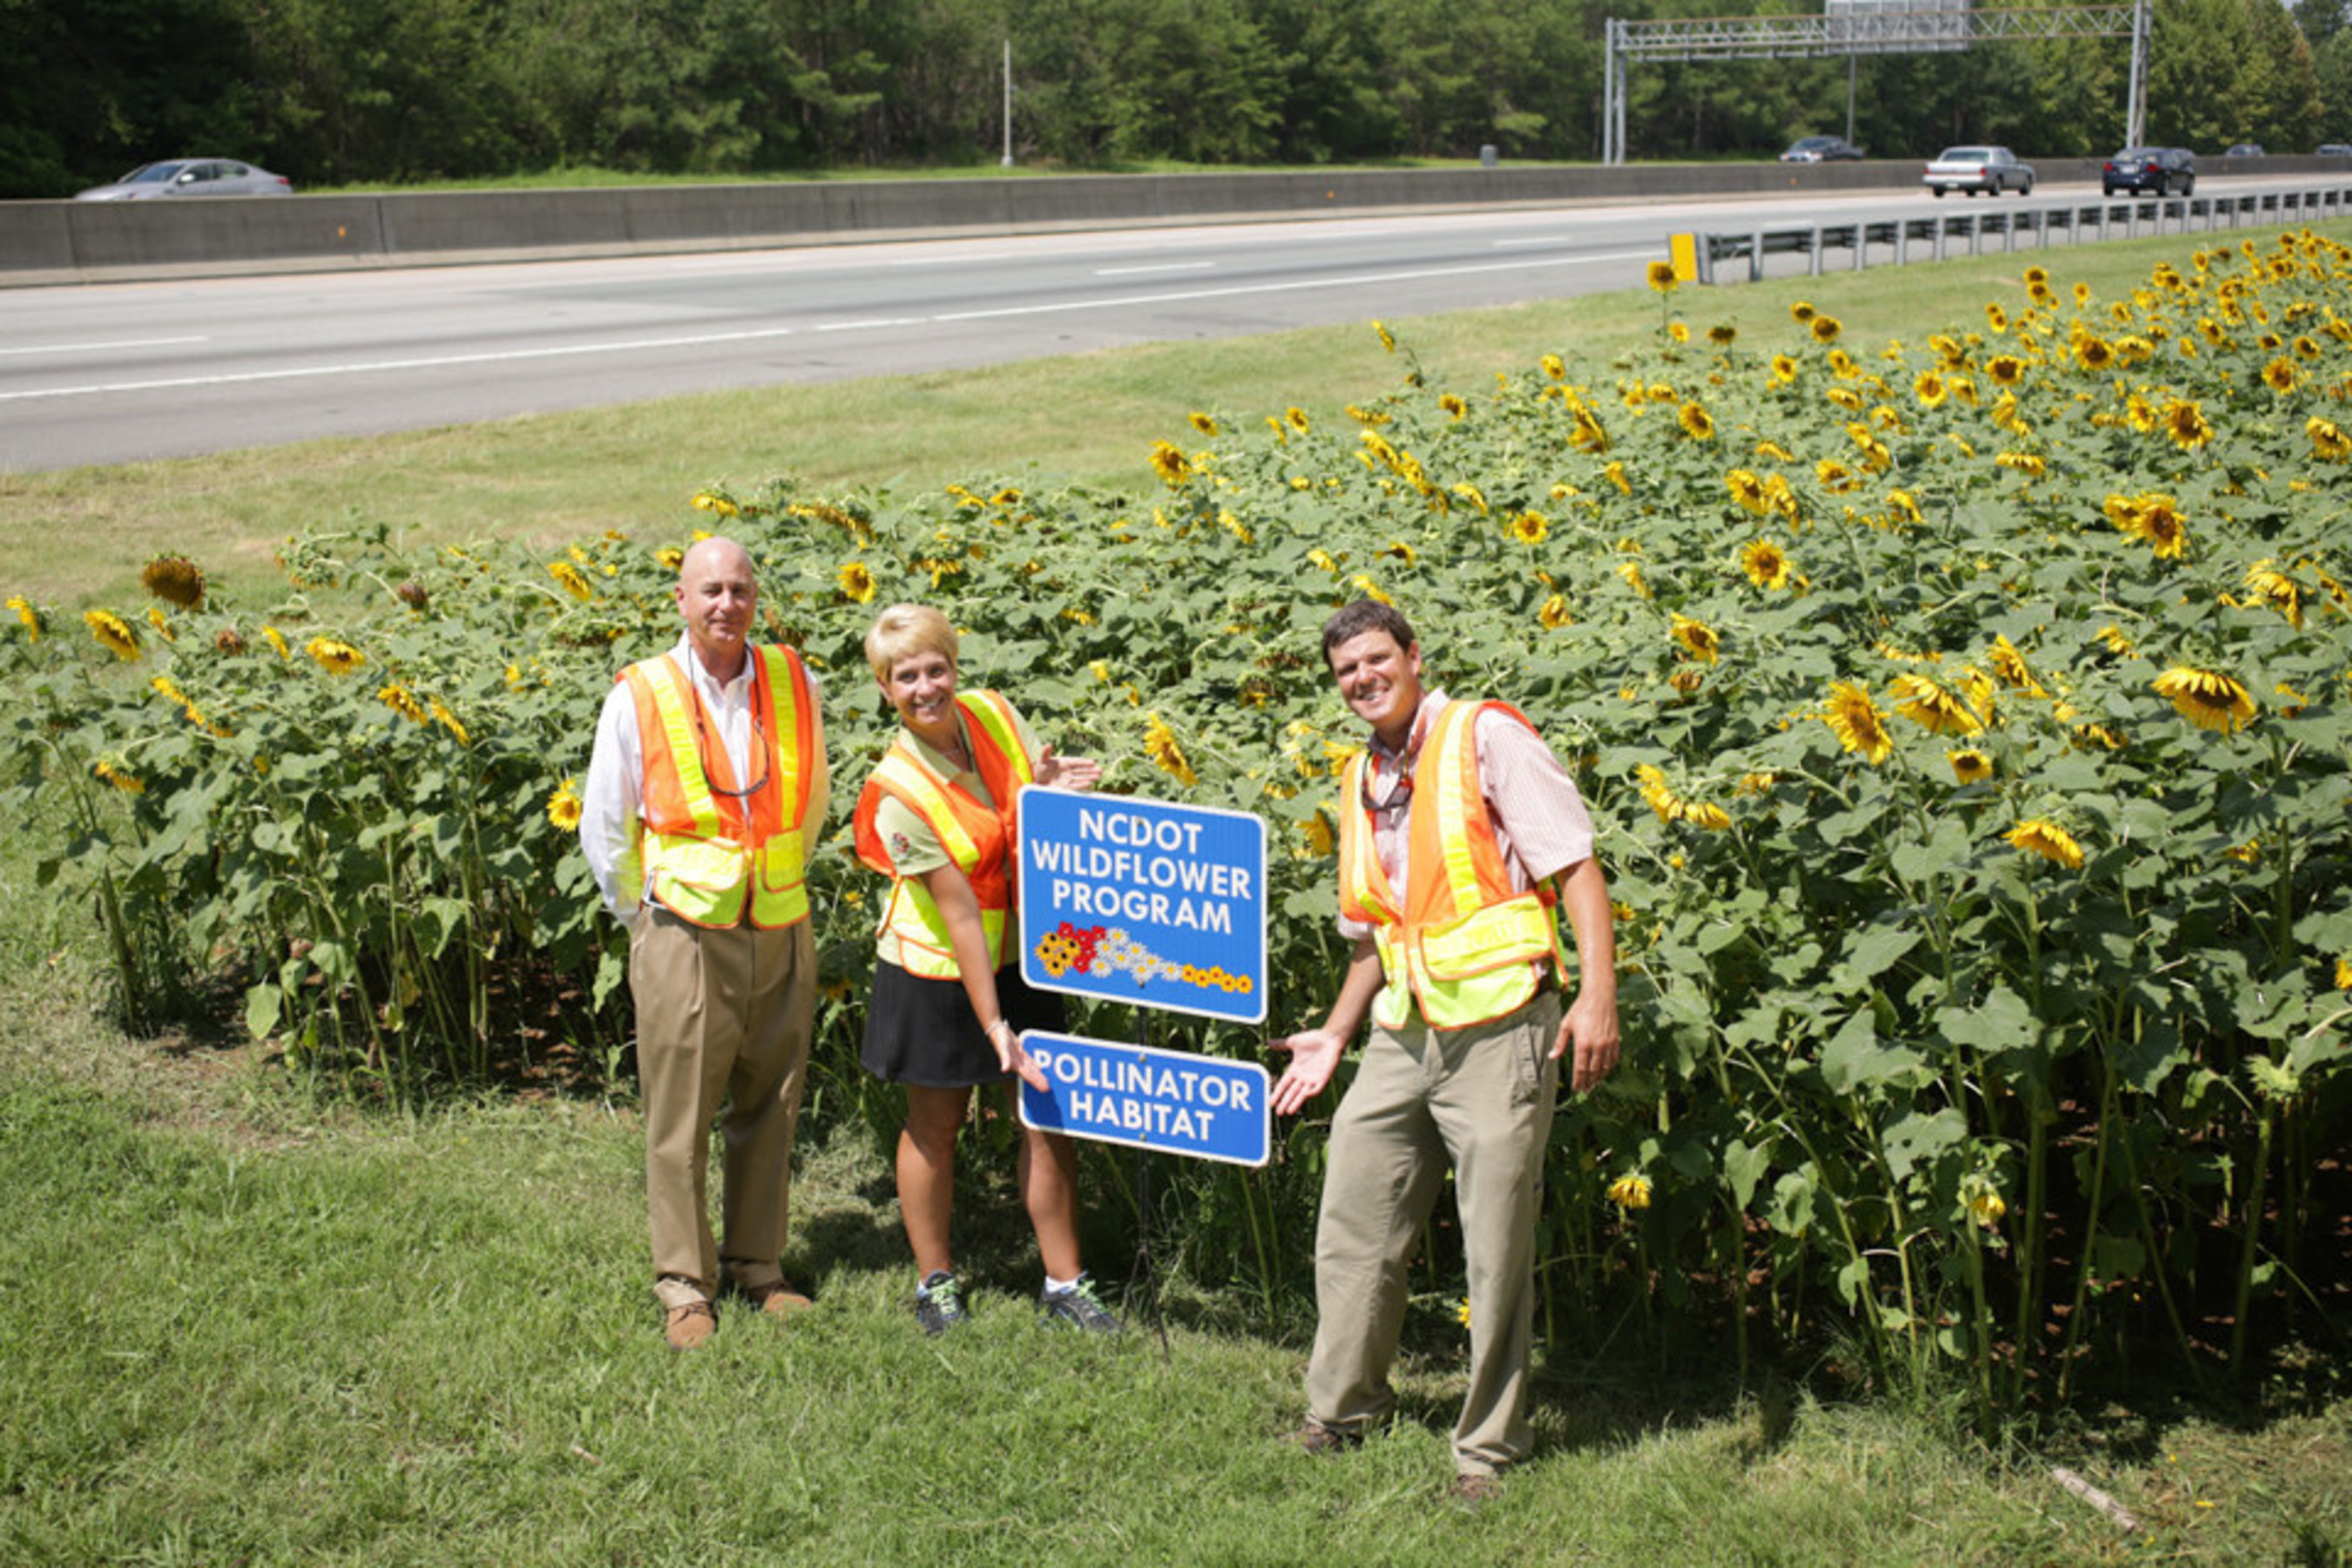 Standing with sunflowers on the side of North Carolina's I-85, planted in collaboration with the North Carolina Department of Transportation.